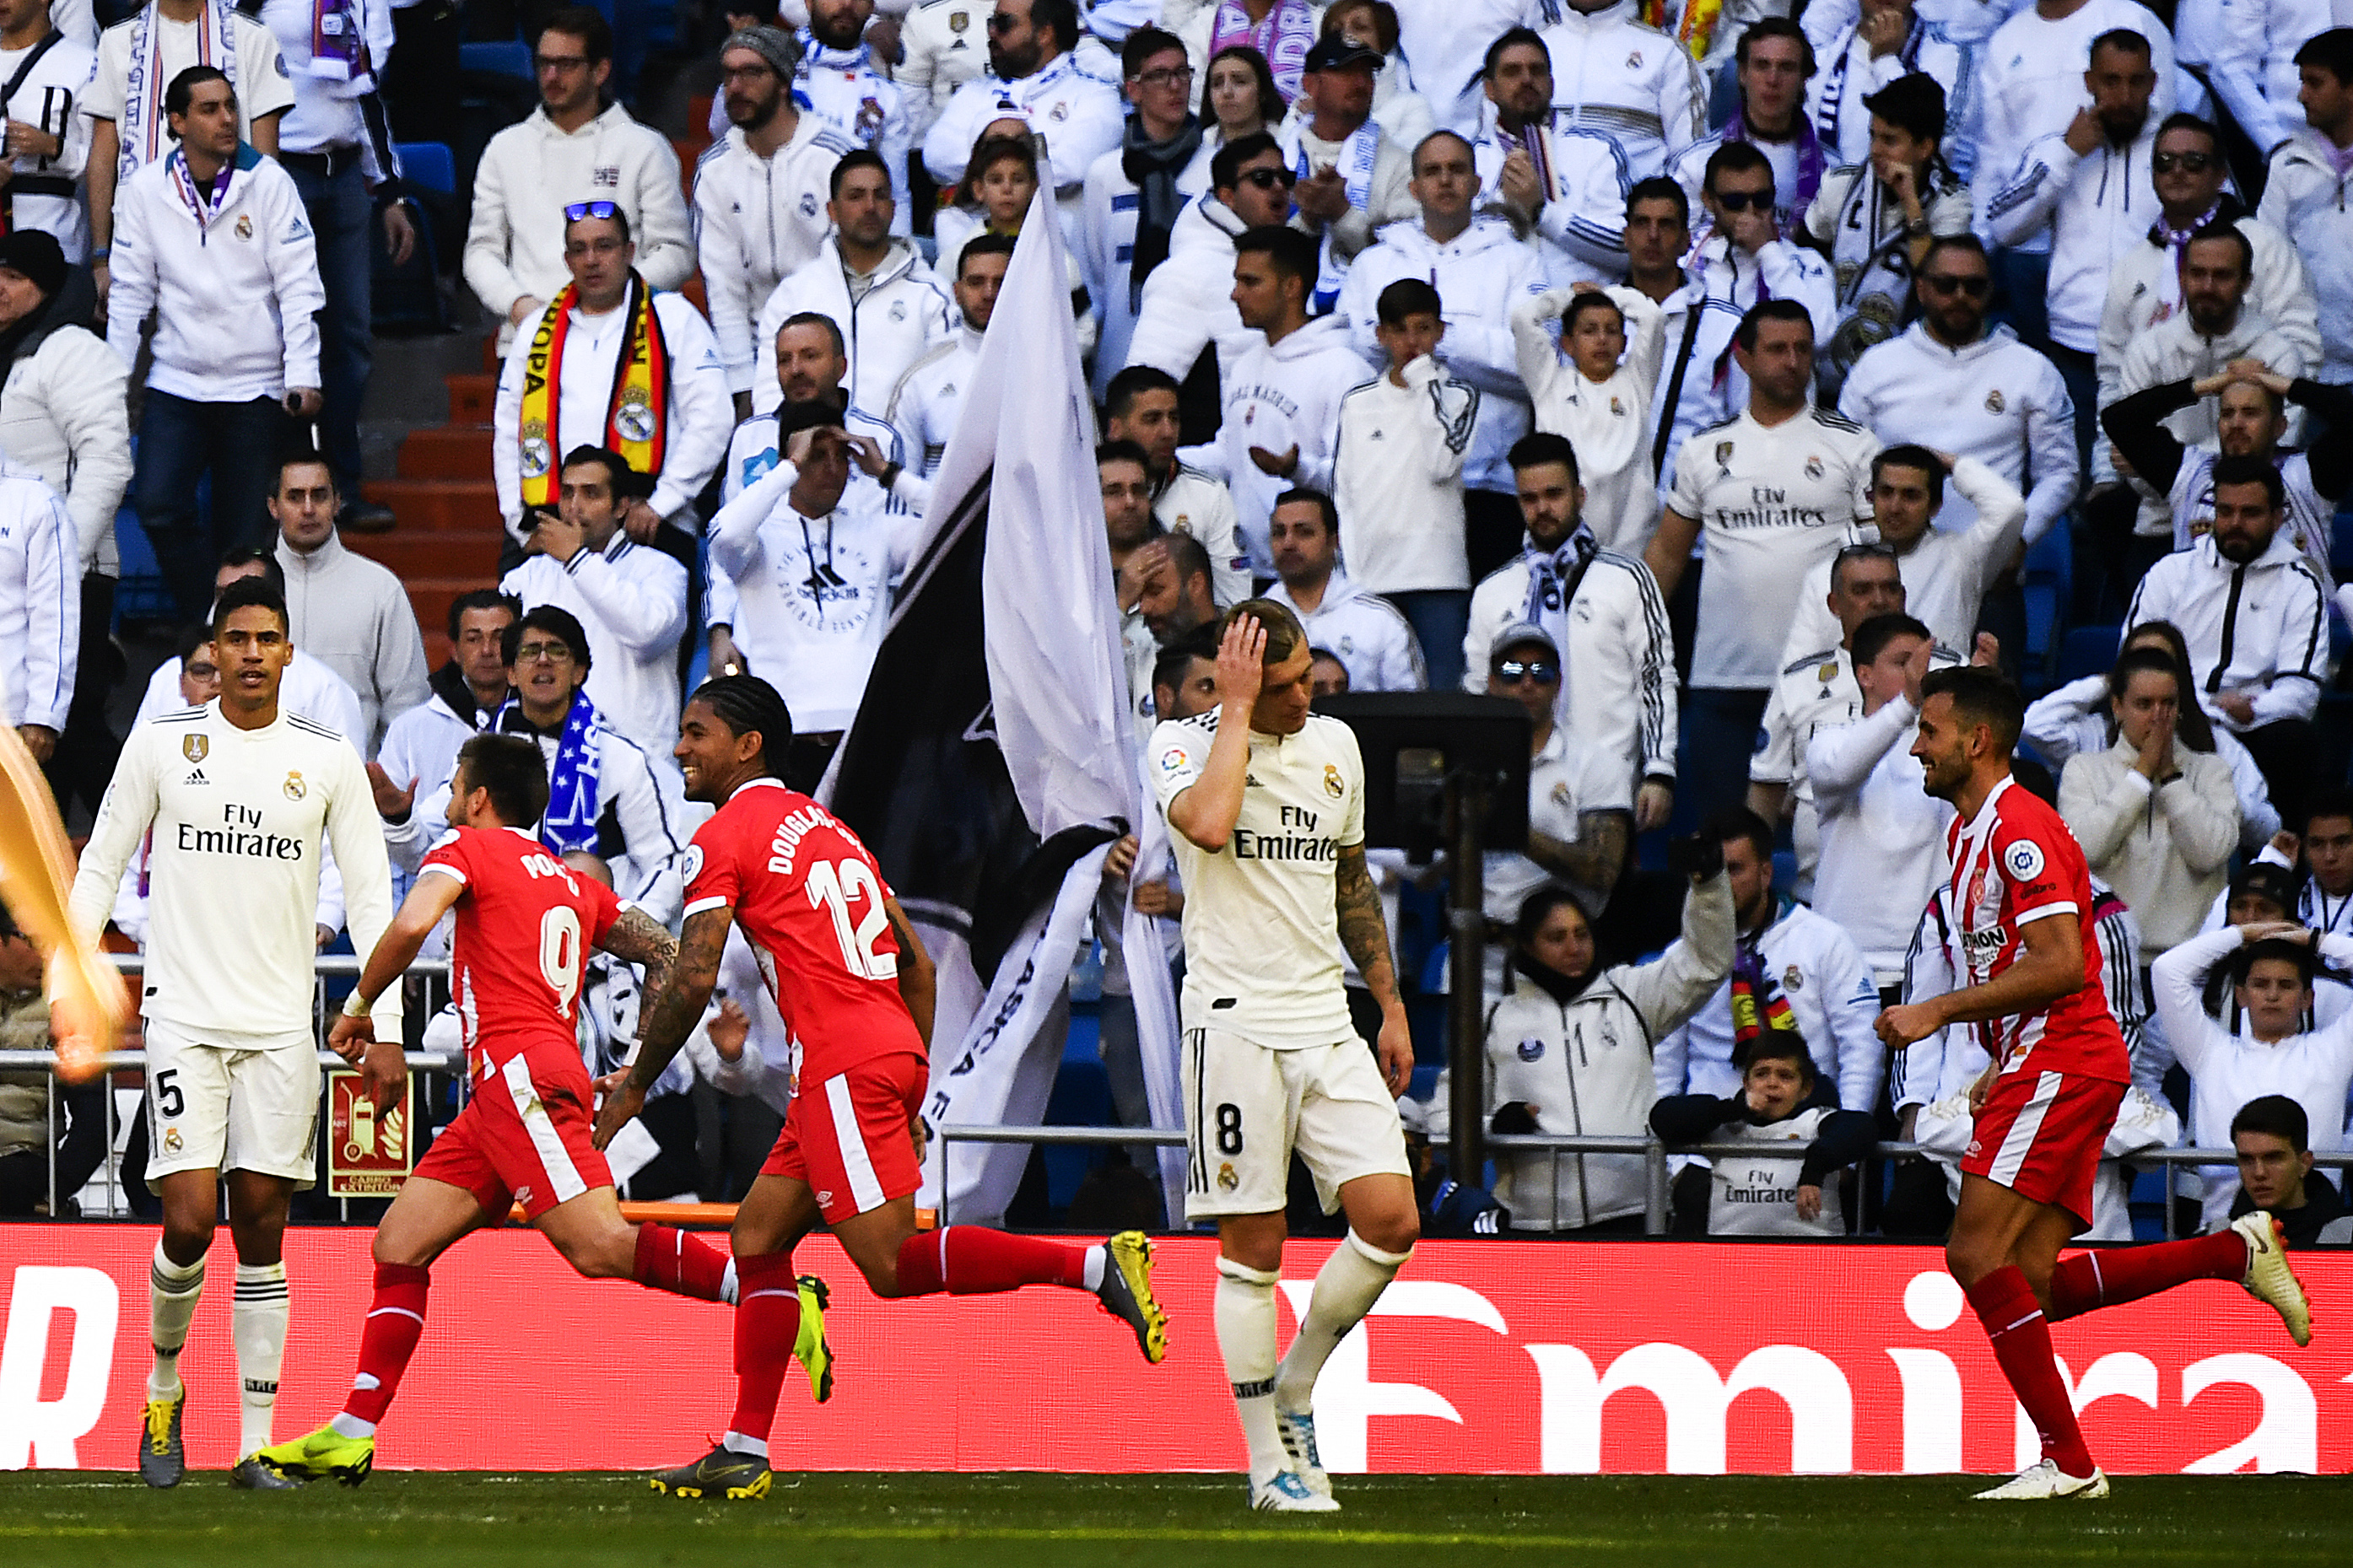 Real Madrid's French defender Raphael Varane (L) and Real Madrid's German midfielder Toni Kroos (C) react as Girona's Spanish midfielder Portu (2ndL) celebrates with teammates after scoring his team's second goal during the Spanish League football match between Real Madrid and Girona at the Santiago Bernabeu stadium in Madrid on February 17, 2019. (Photo by GABRIEL BOUYS / AFP)        (Photo credit should read GABRIEL BOUYS/AFP/Getty Images)